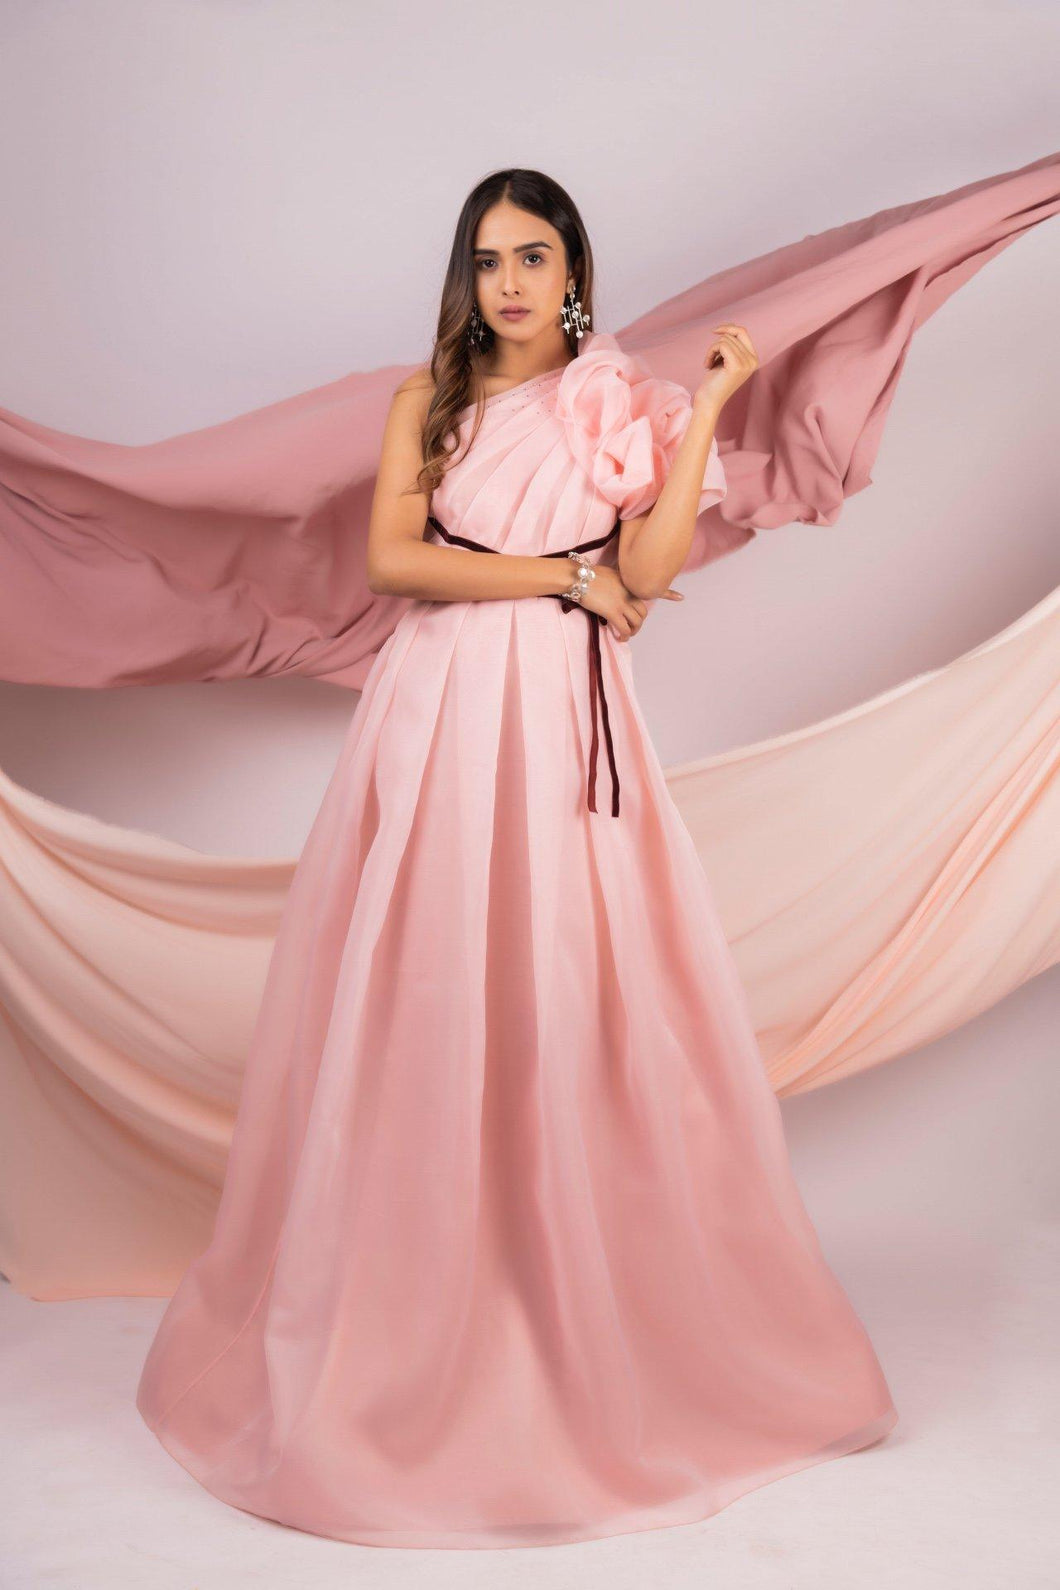 Dramatic gown with pleats and smocked sleeve - Pranati Kejriwall